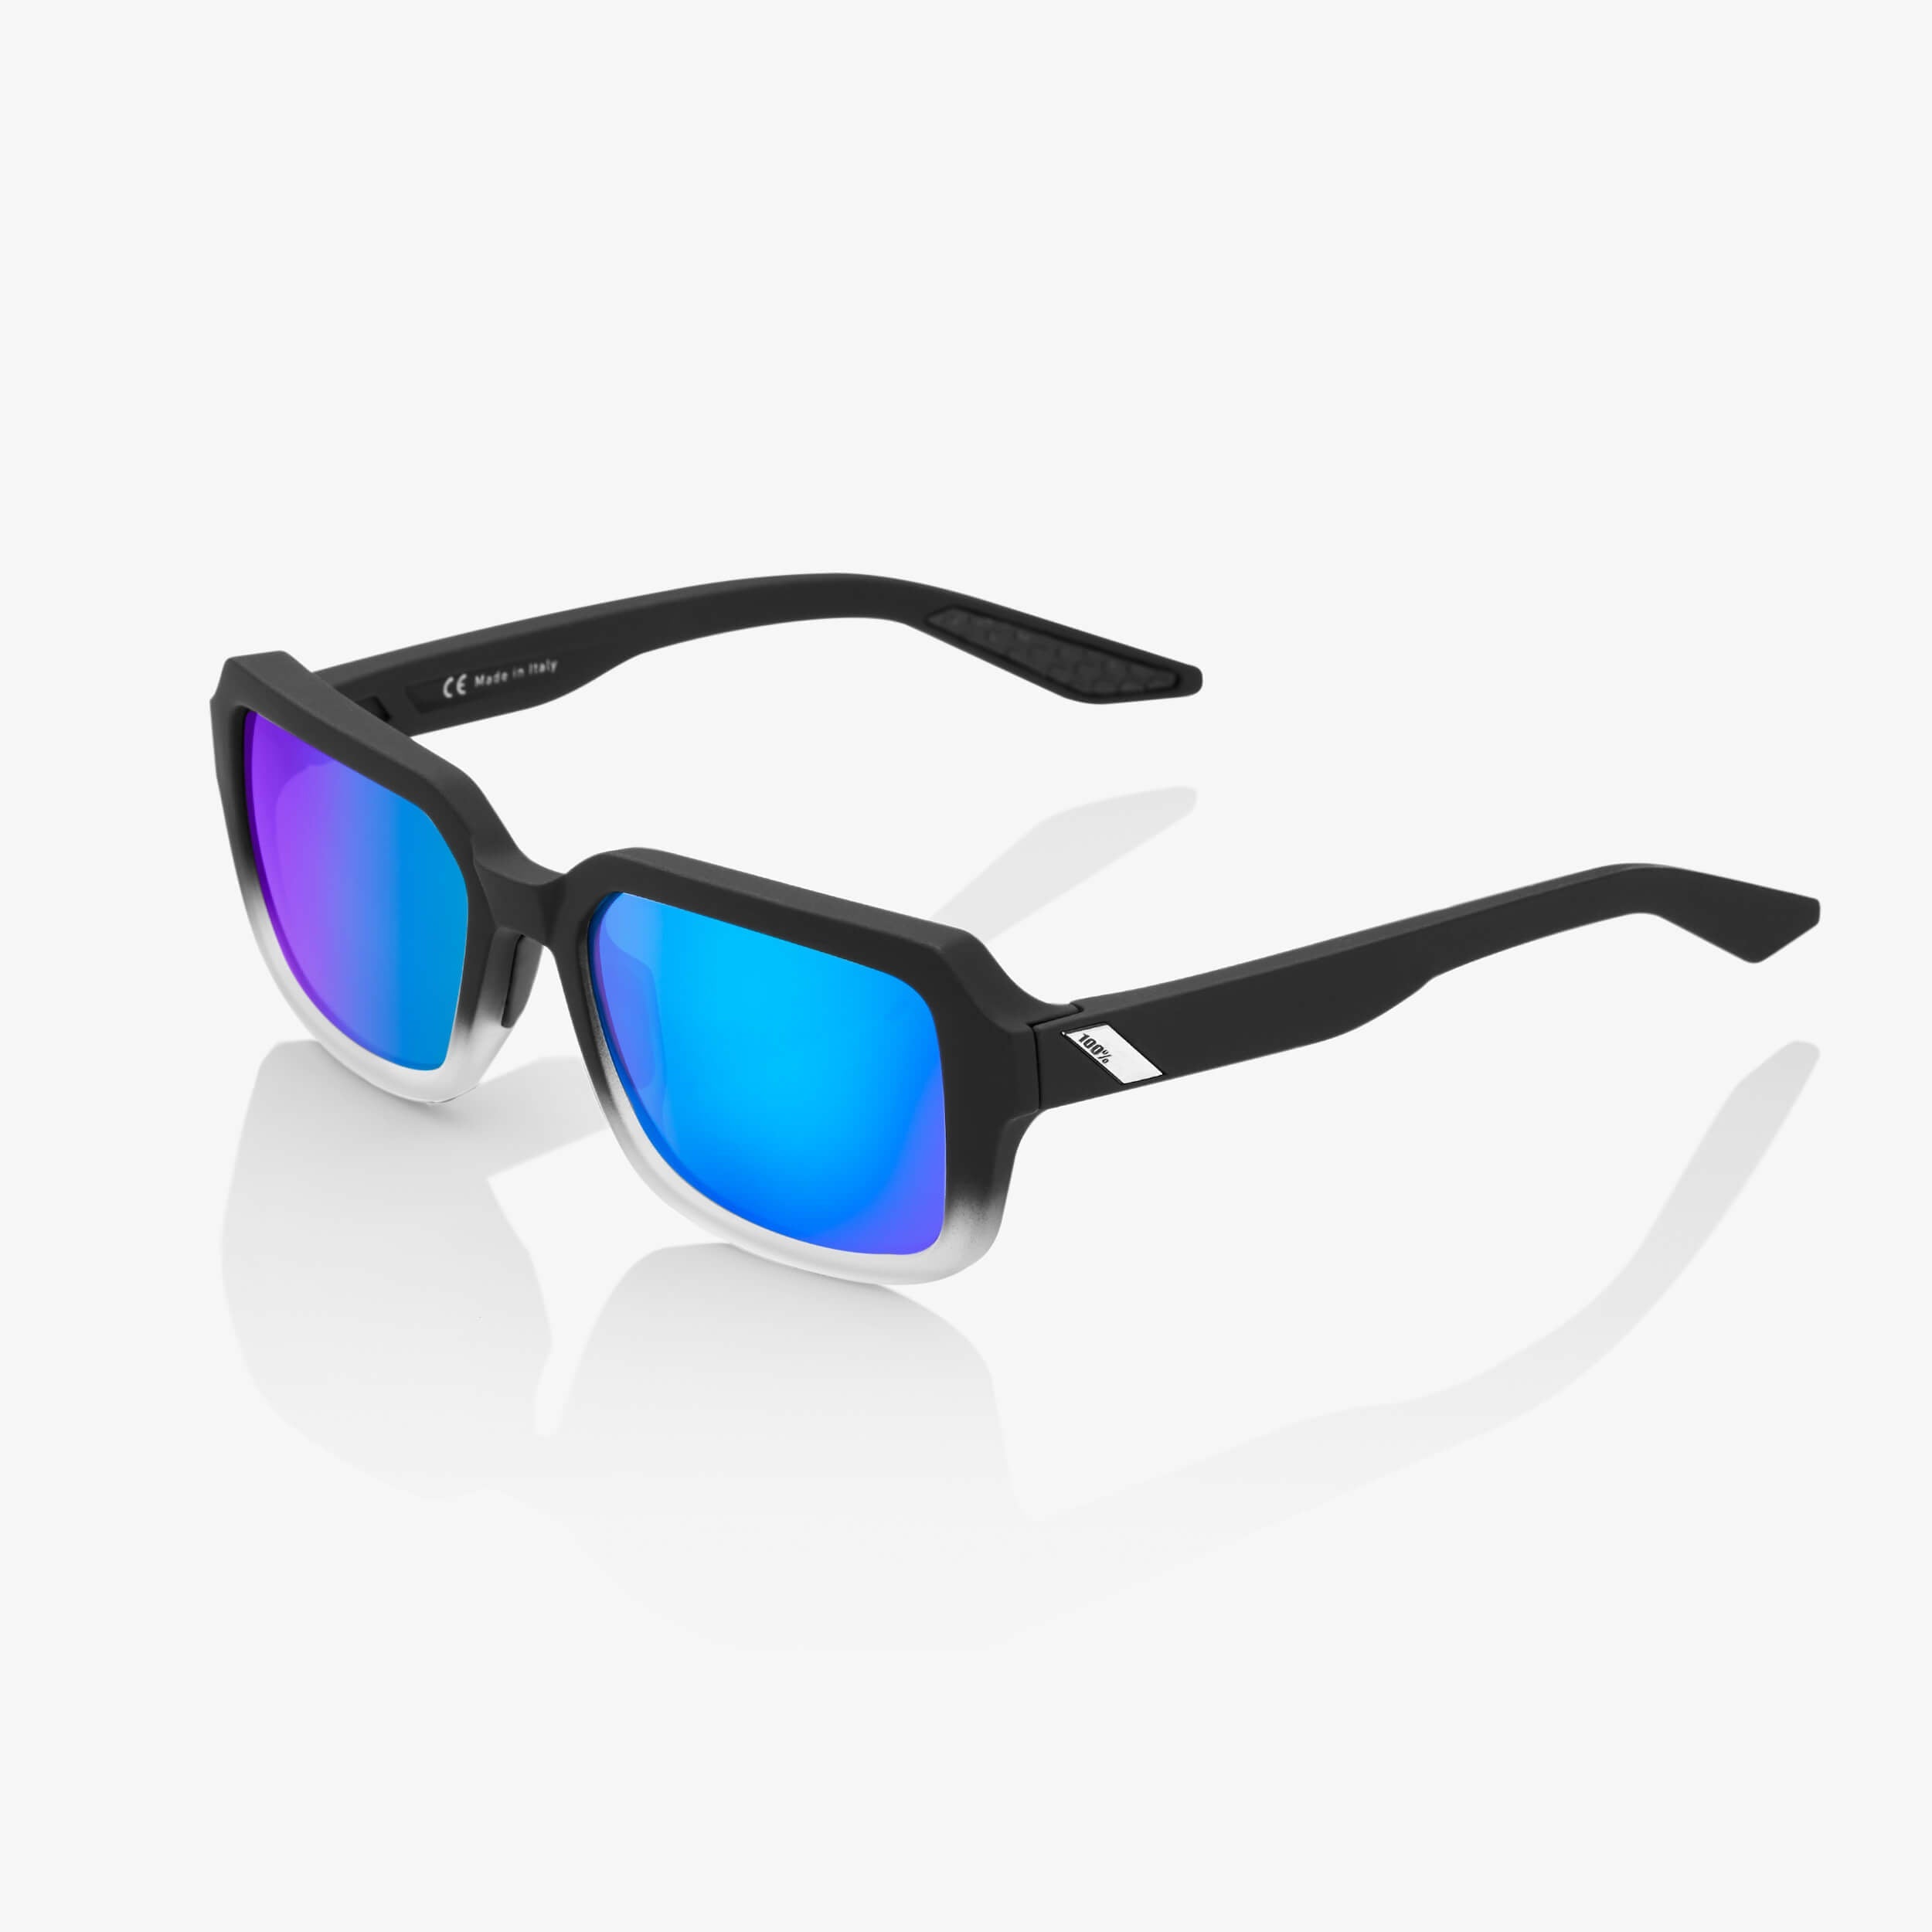 RIDELEY - Soft Tact Fade Black - Blue Multilayer Mirror Lens